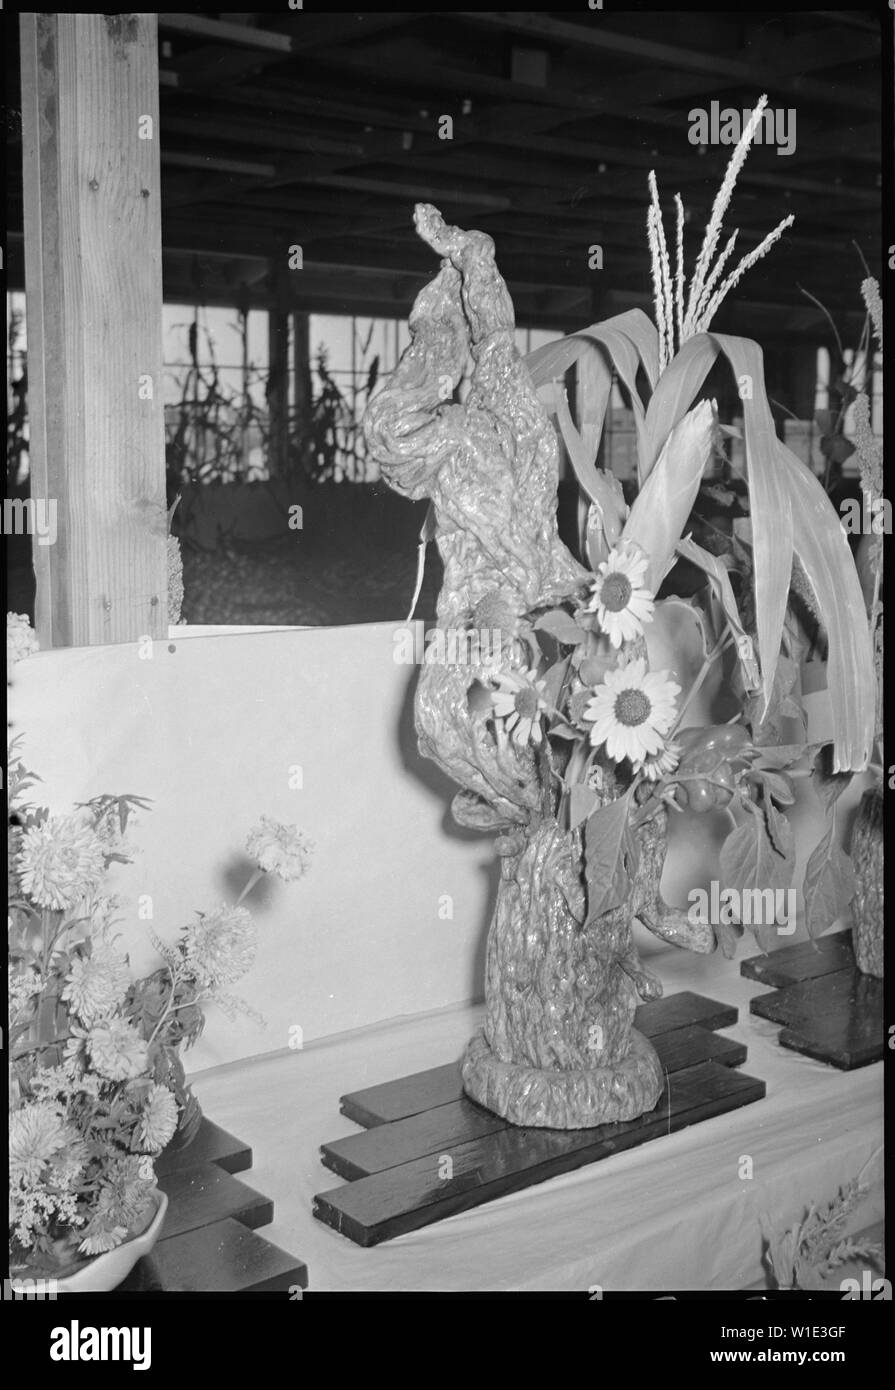 Granada Relocation Center, Amache, Colorado. Display of flower and vegetable arrangement at the Ama . . .; Scope and content:  The full caption for this photograph reads: Granada Relocation Center, Amache, Colorado. Display of flower and vegetable arrangement at the Amache Agricultural Fair September 11 and 12. Stock Photo